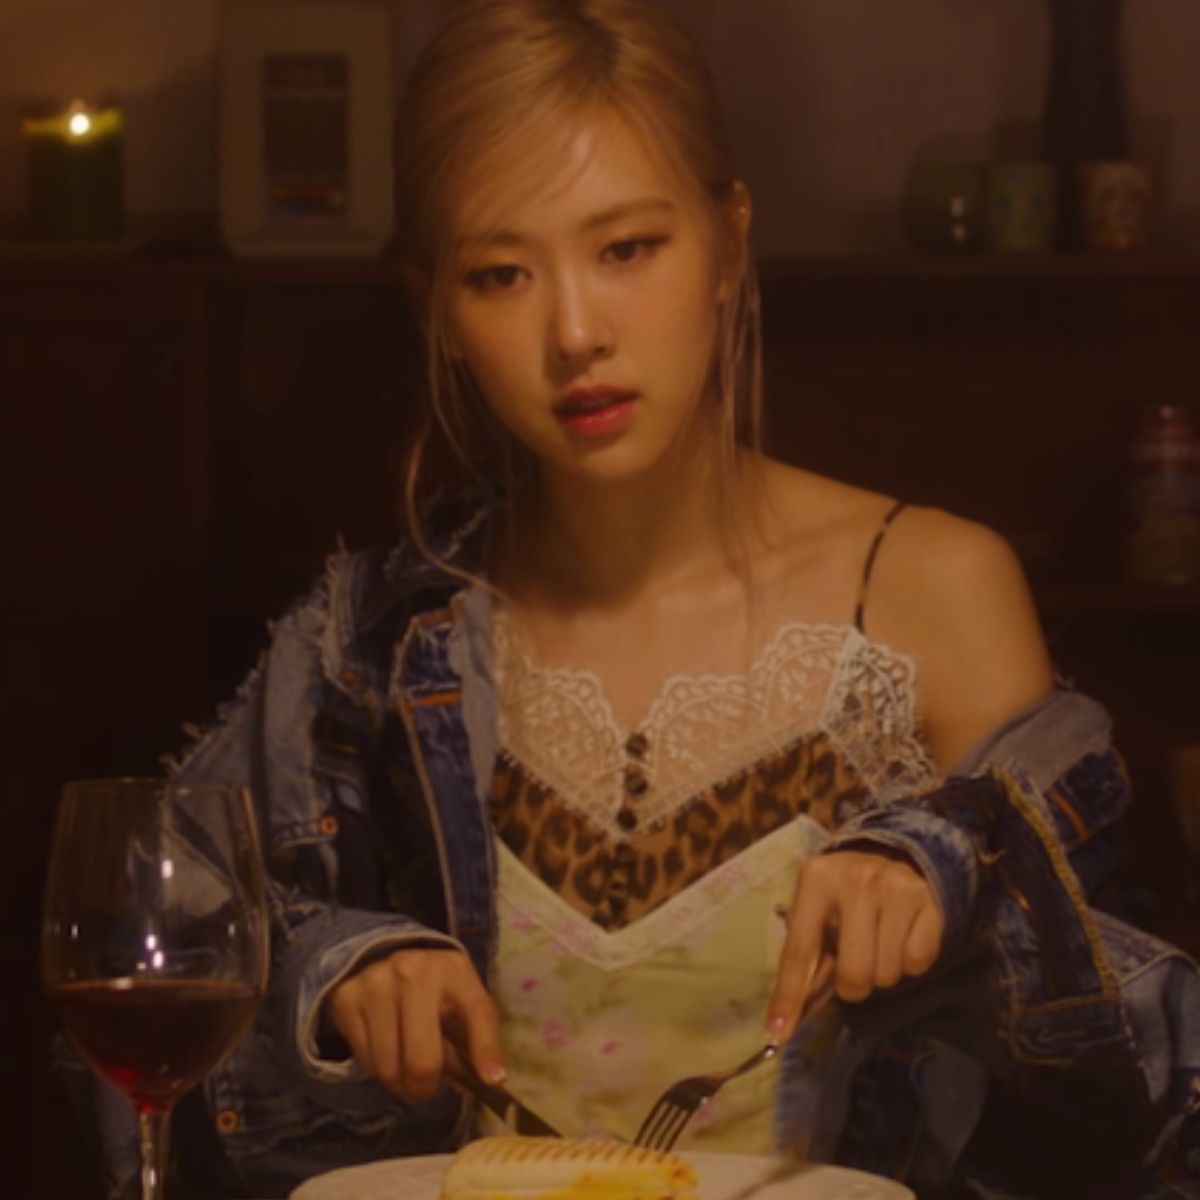 VIDEO: BLACKPINK member Rosé's love is 'dead and gone' in the melancholic teaser of solo sub title track